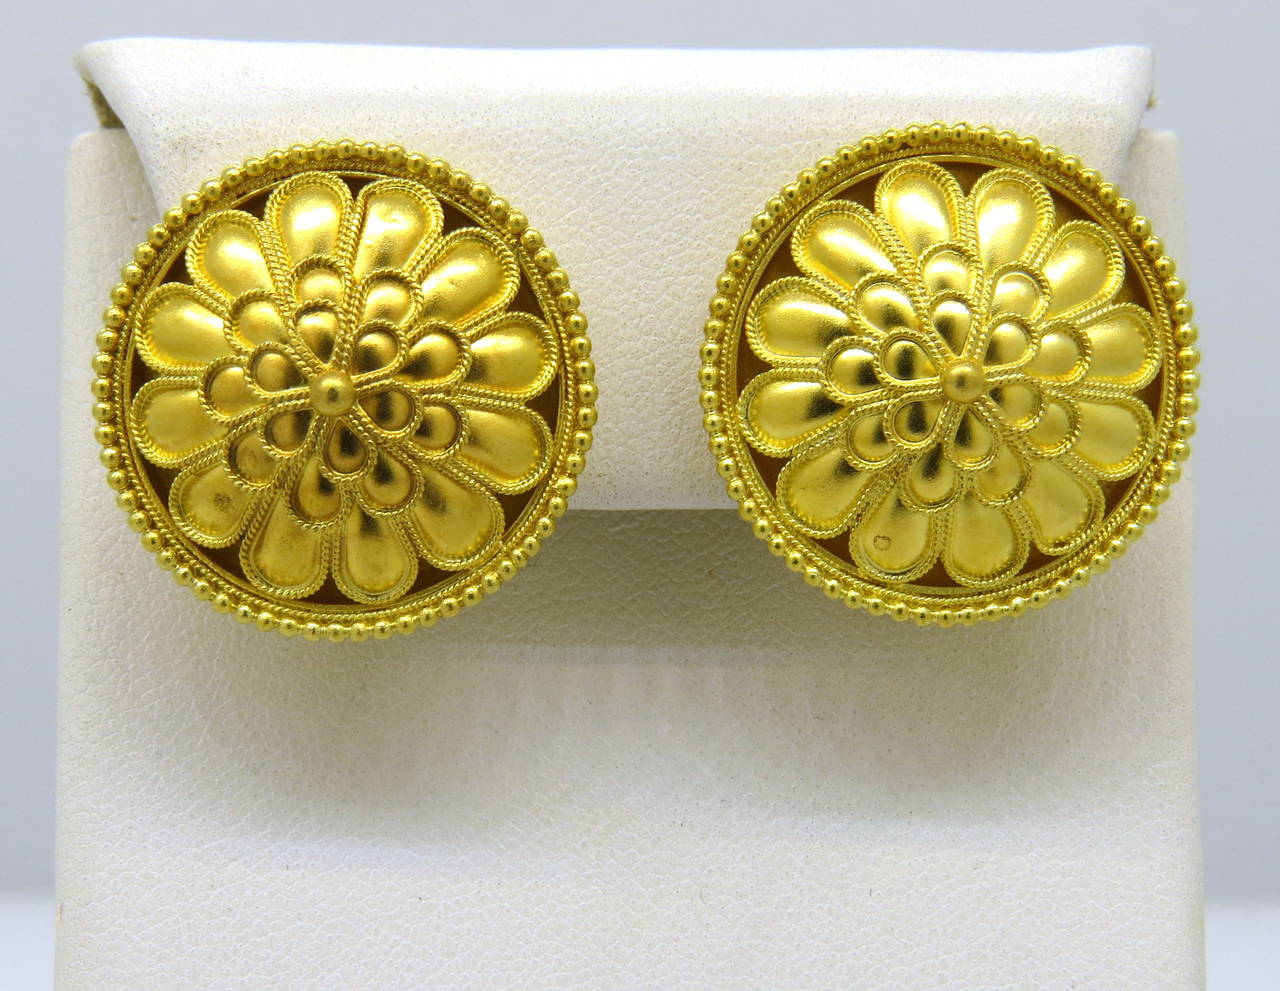 Ilias Lalaounis 18k gold earrings,measuring 26mm in diameter. Marked Greece,Lalaounis mark and 750. weight - 20.3 gr